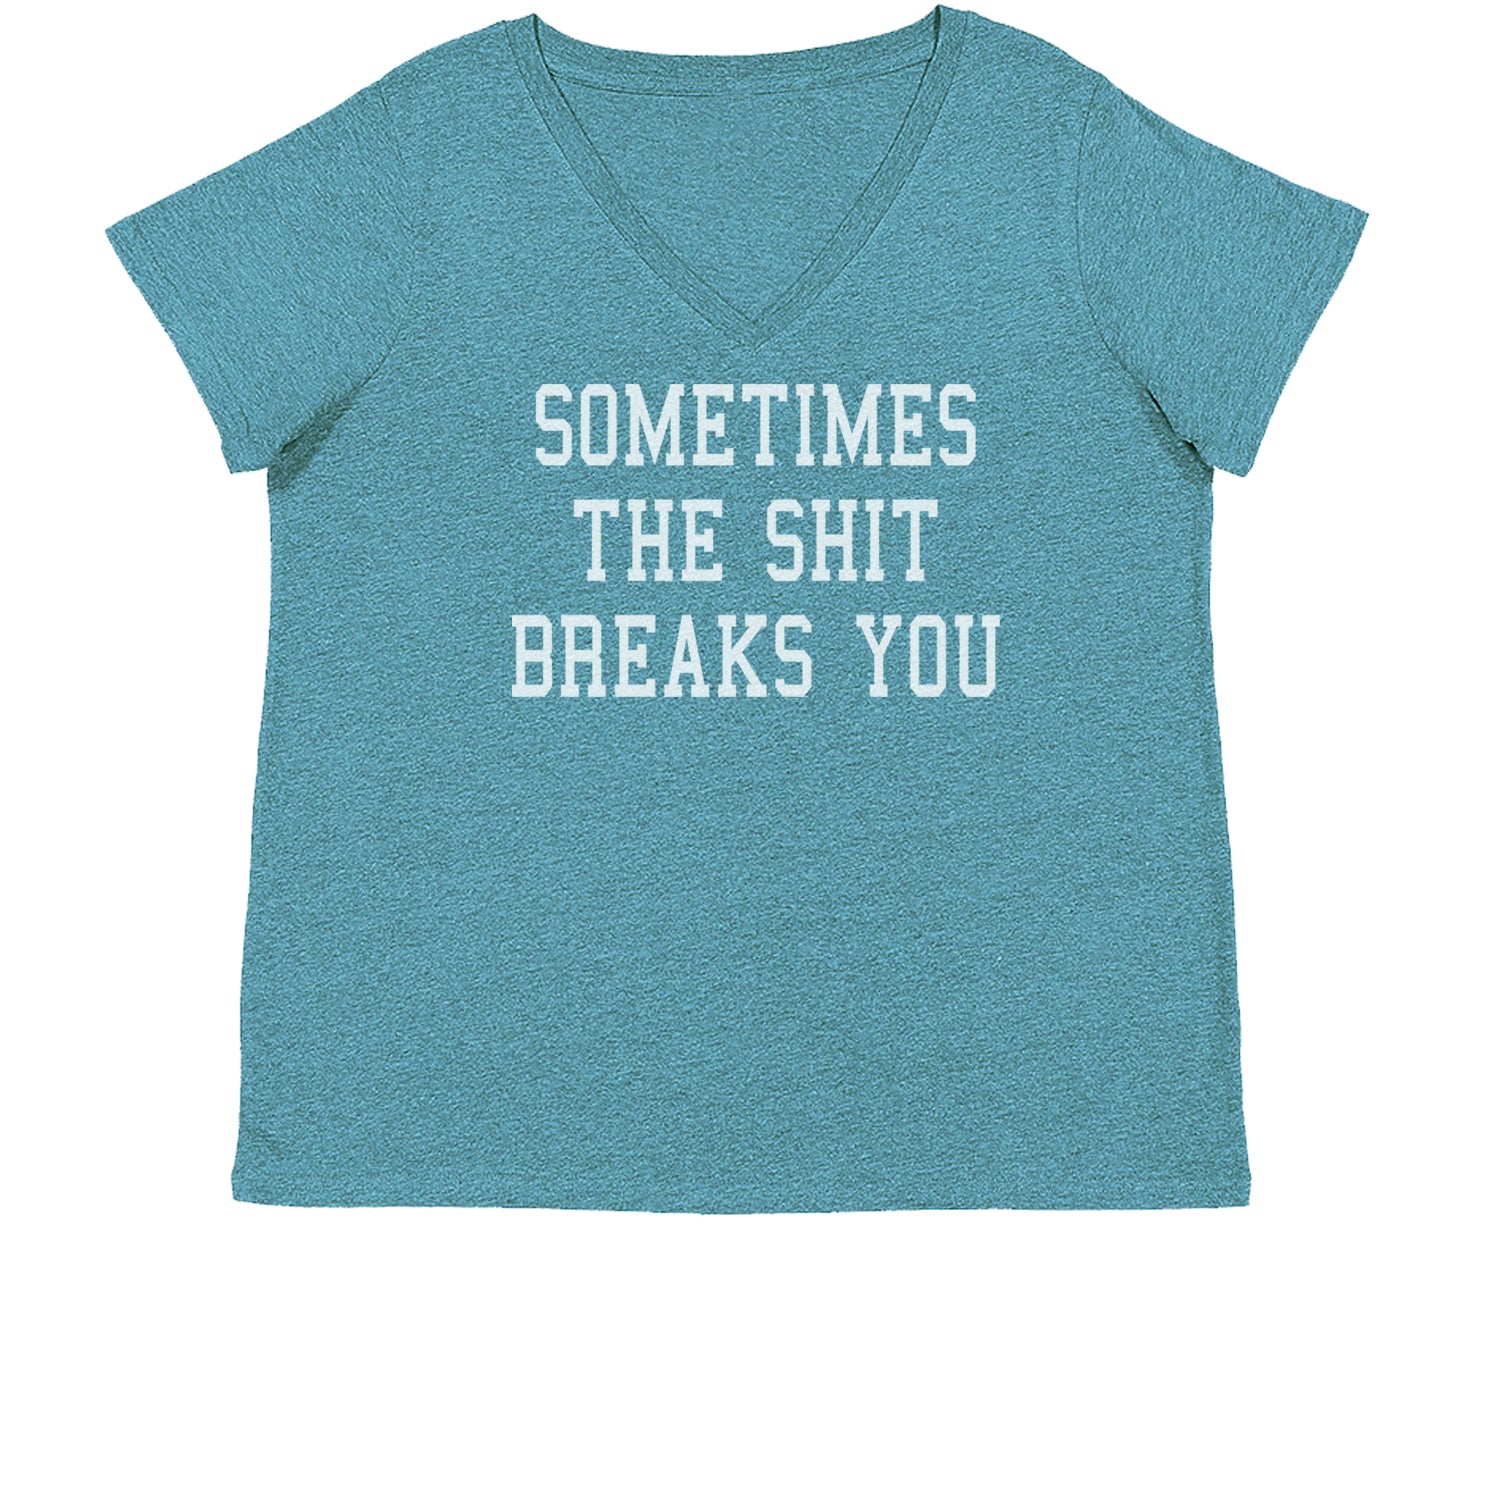 Sometimes The Sh-t Breaks You Womens Plus Size V-Neck T-shirt china, chinese, funny, in, man, meme, observed, shanghai, shirt by Expression Tees